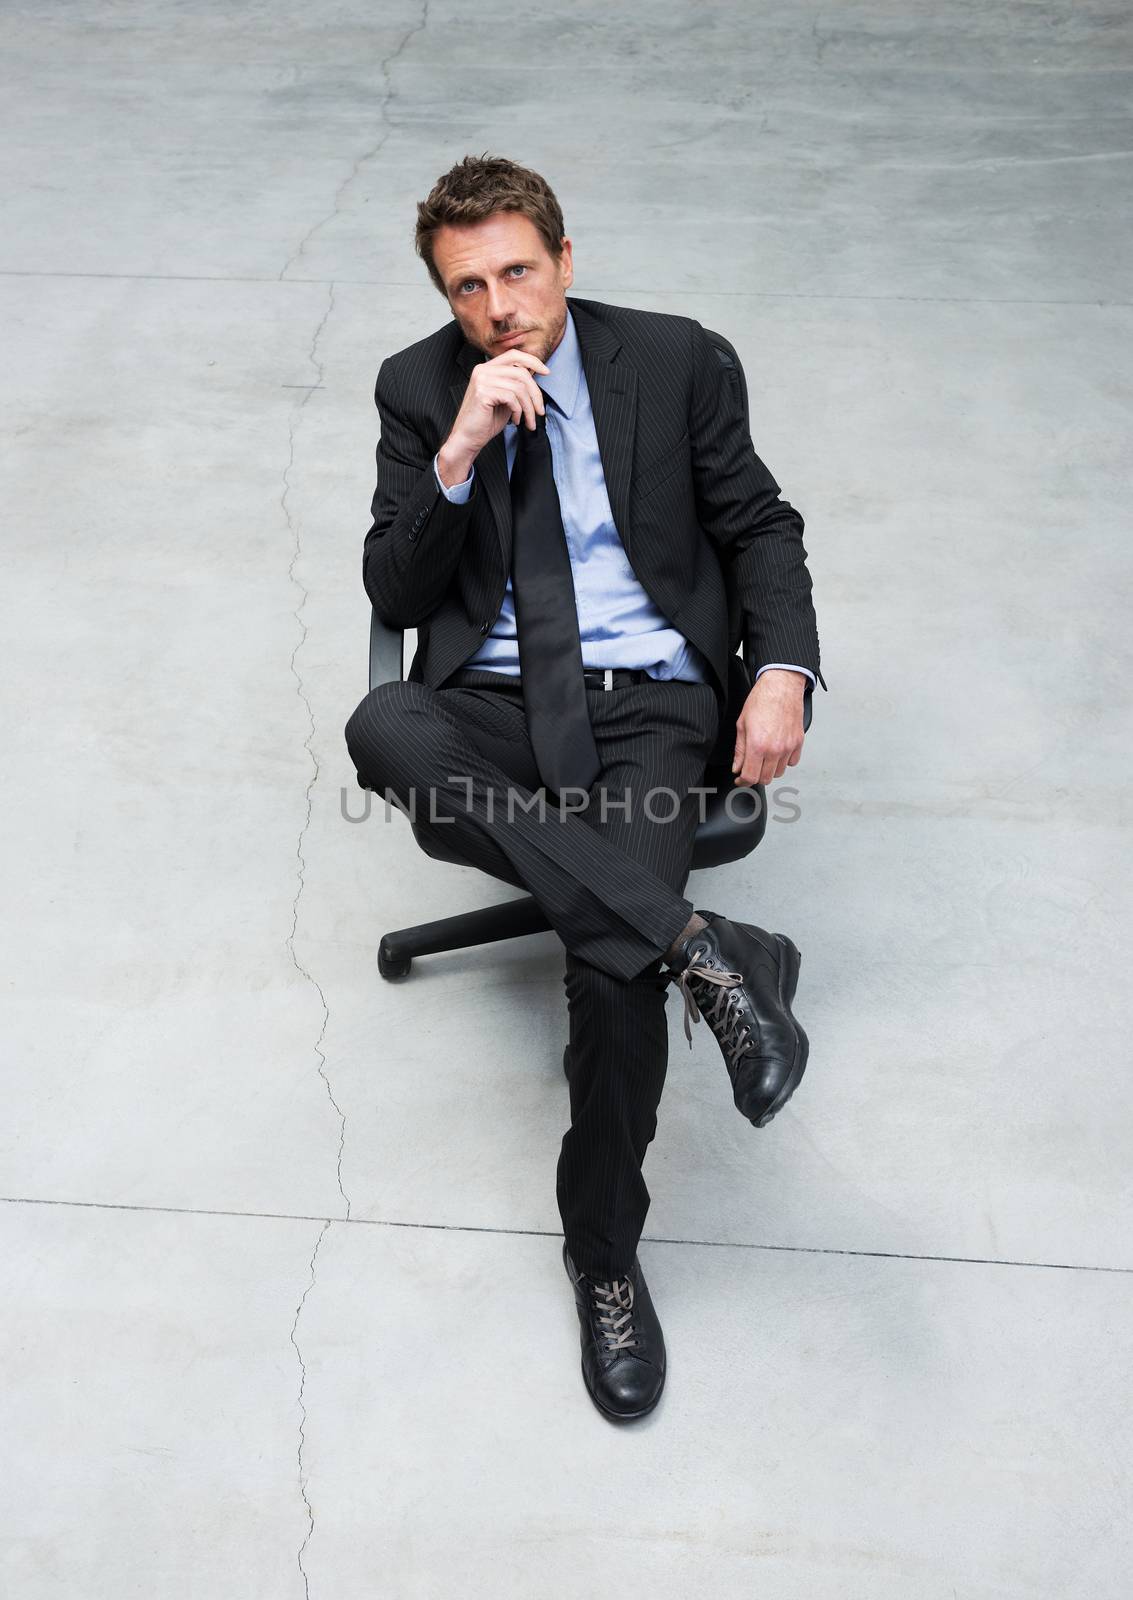 Smiling businessman sitting on an office chair with hand on chin against concrete floor background.